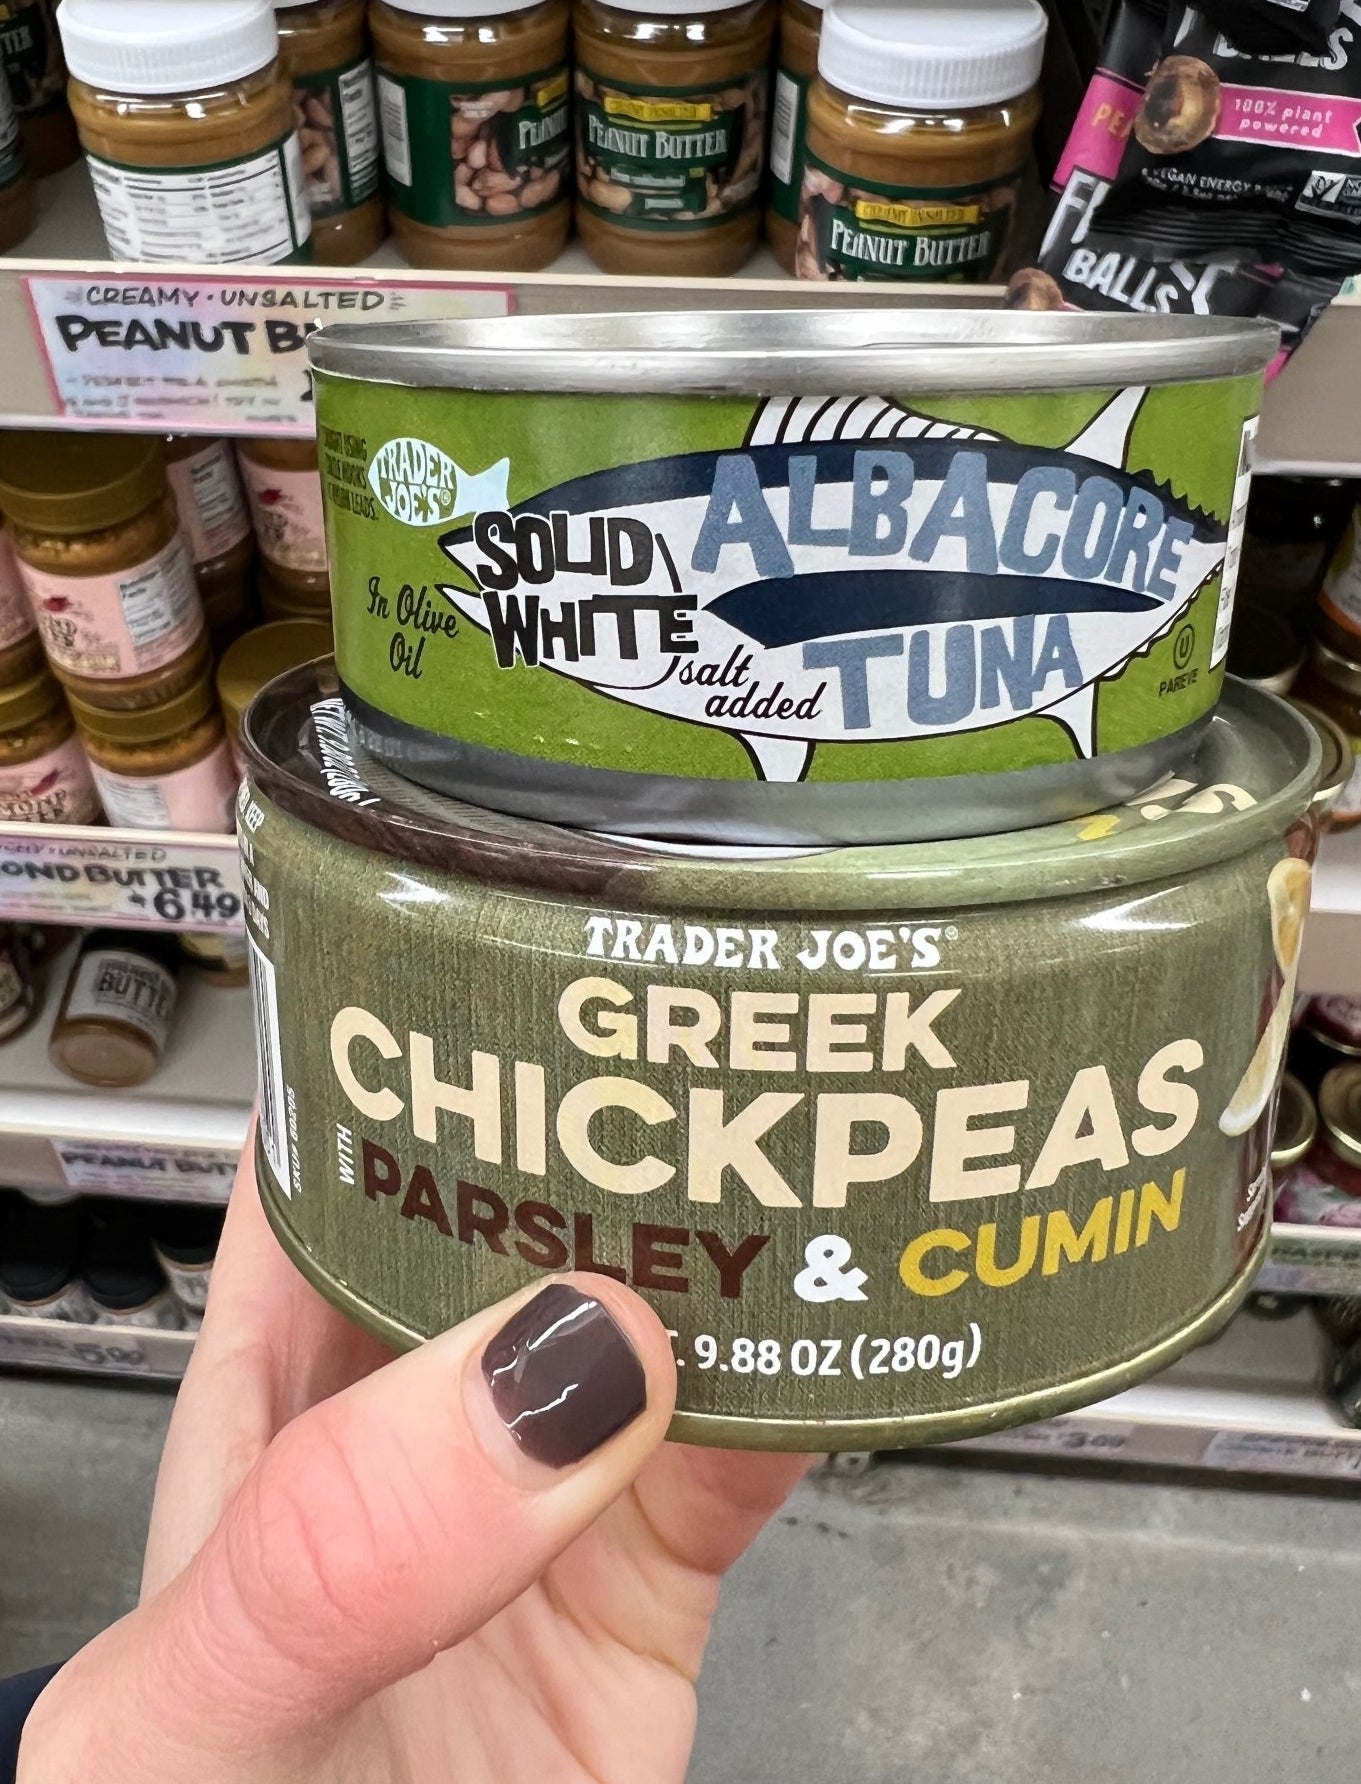 A can of tuna fish and a can of chickpeas.